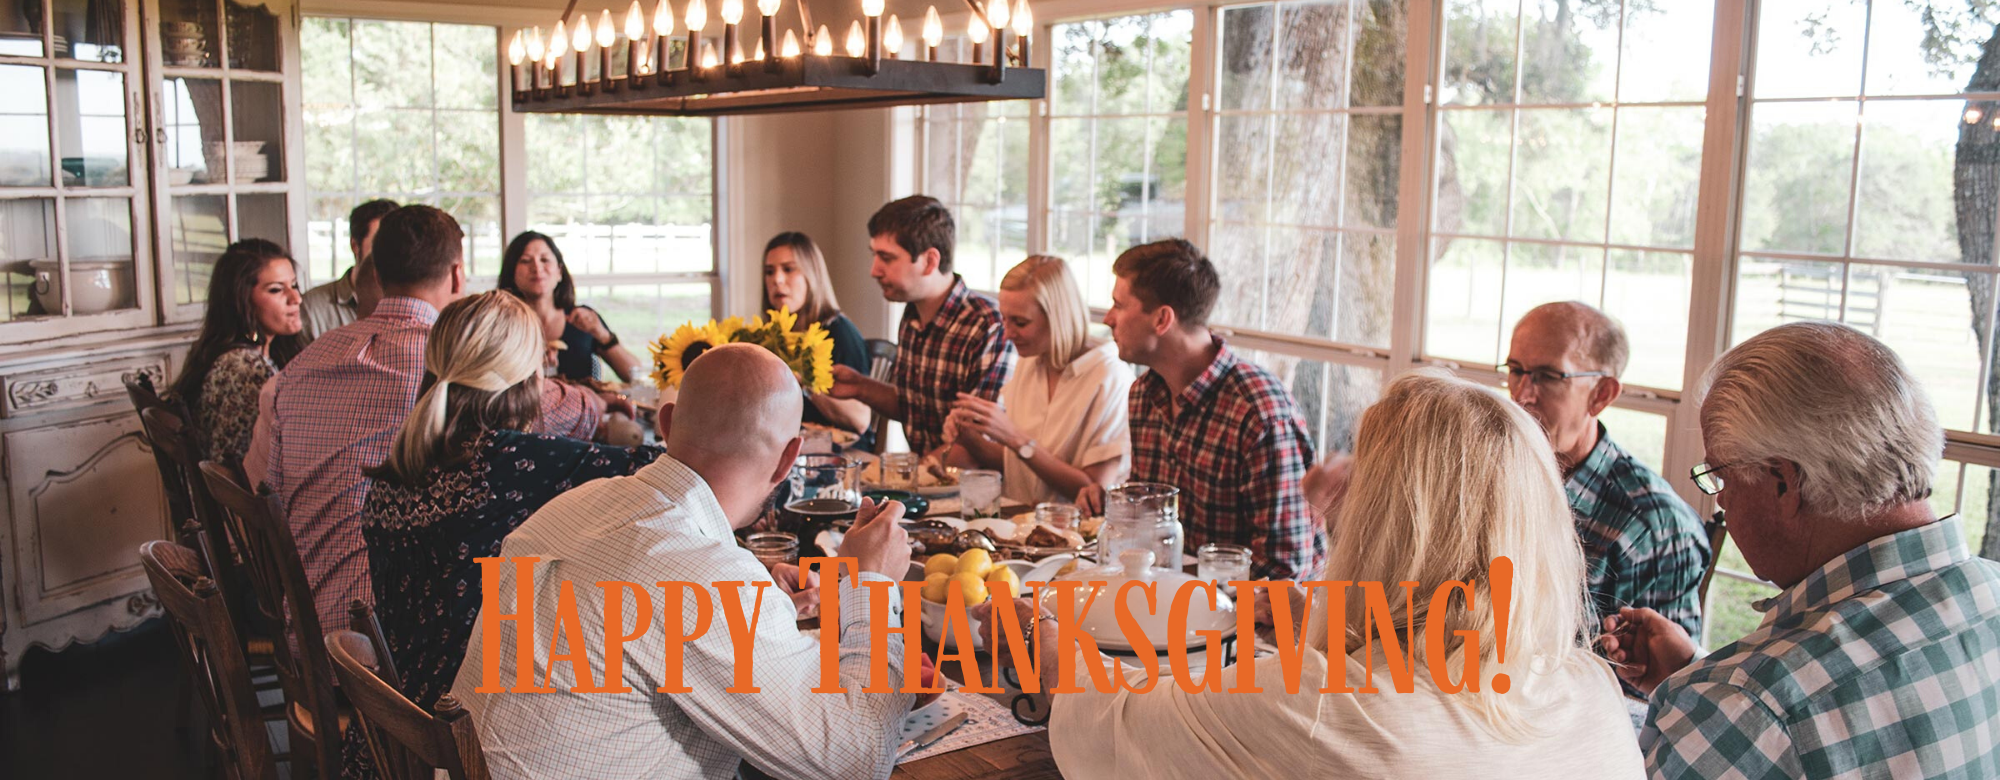 [WATCH] Happy Thanksgiving from the Tippit Dental Family